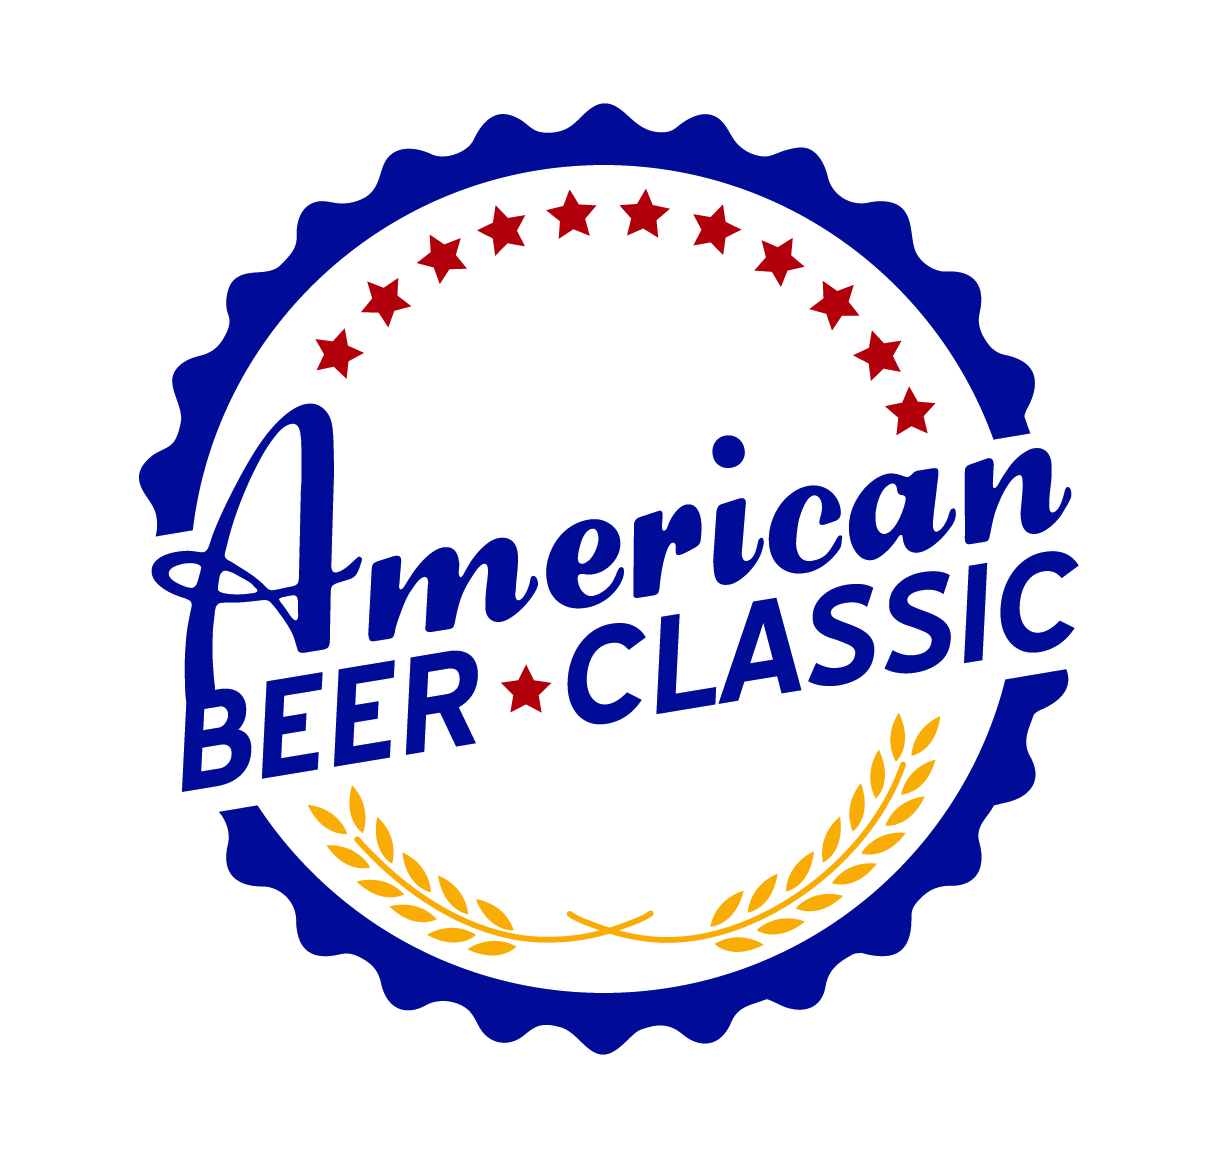 Easy as ABC in D.C. | American Beer Classic